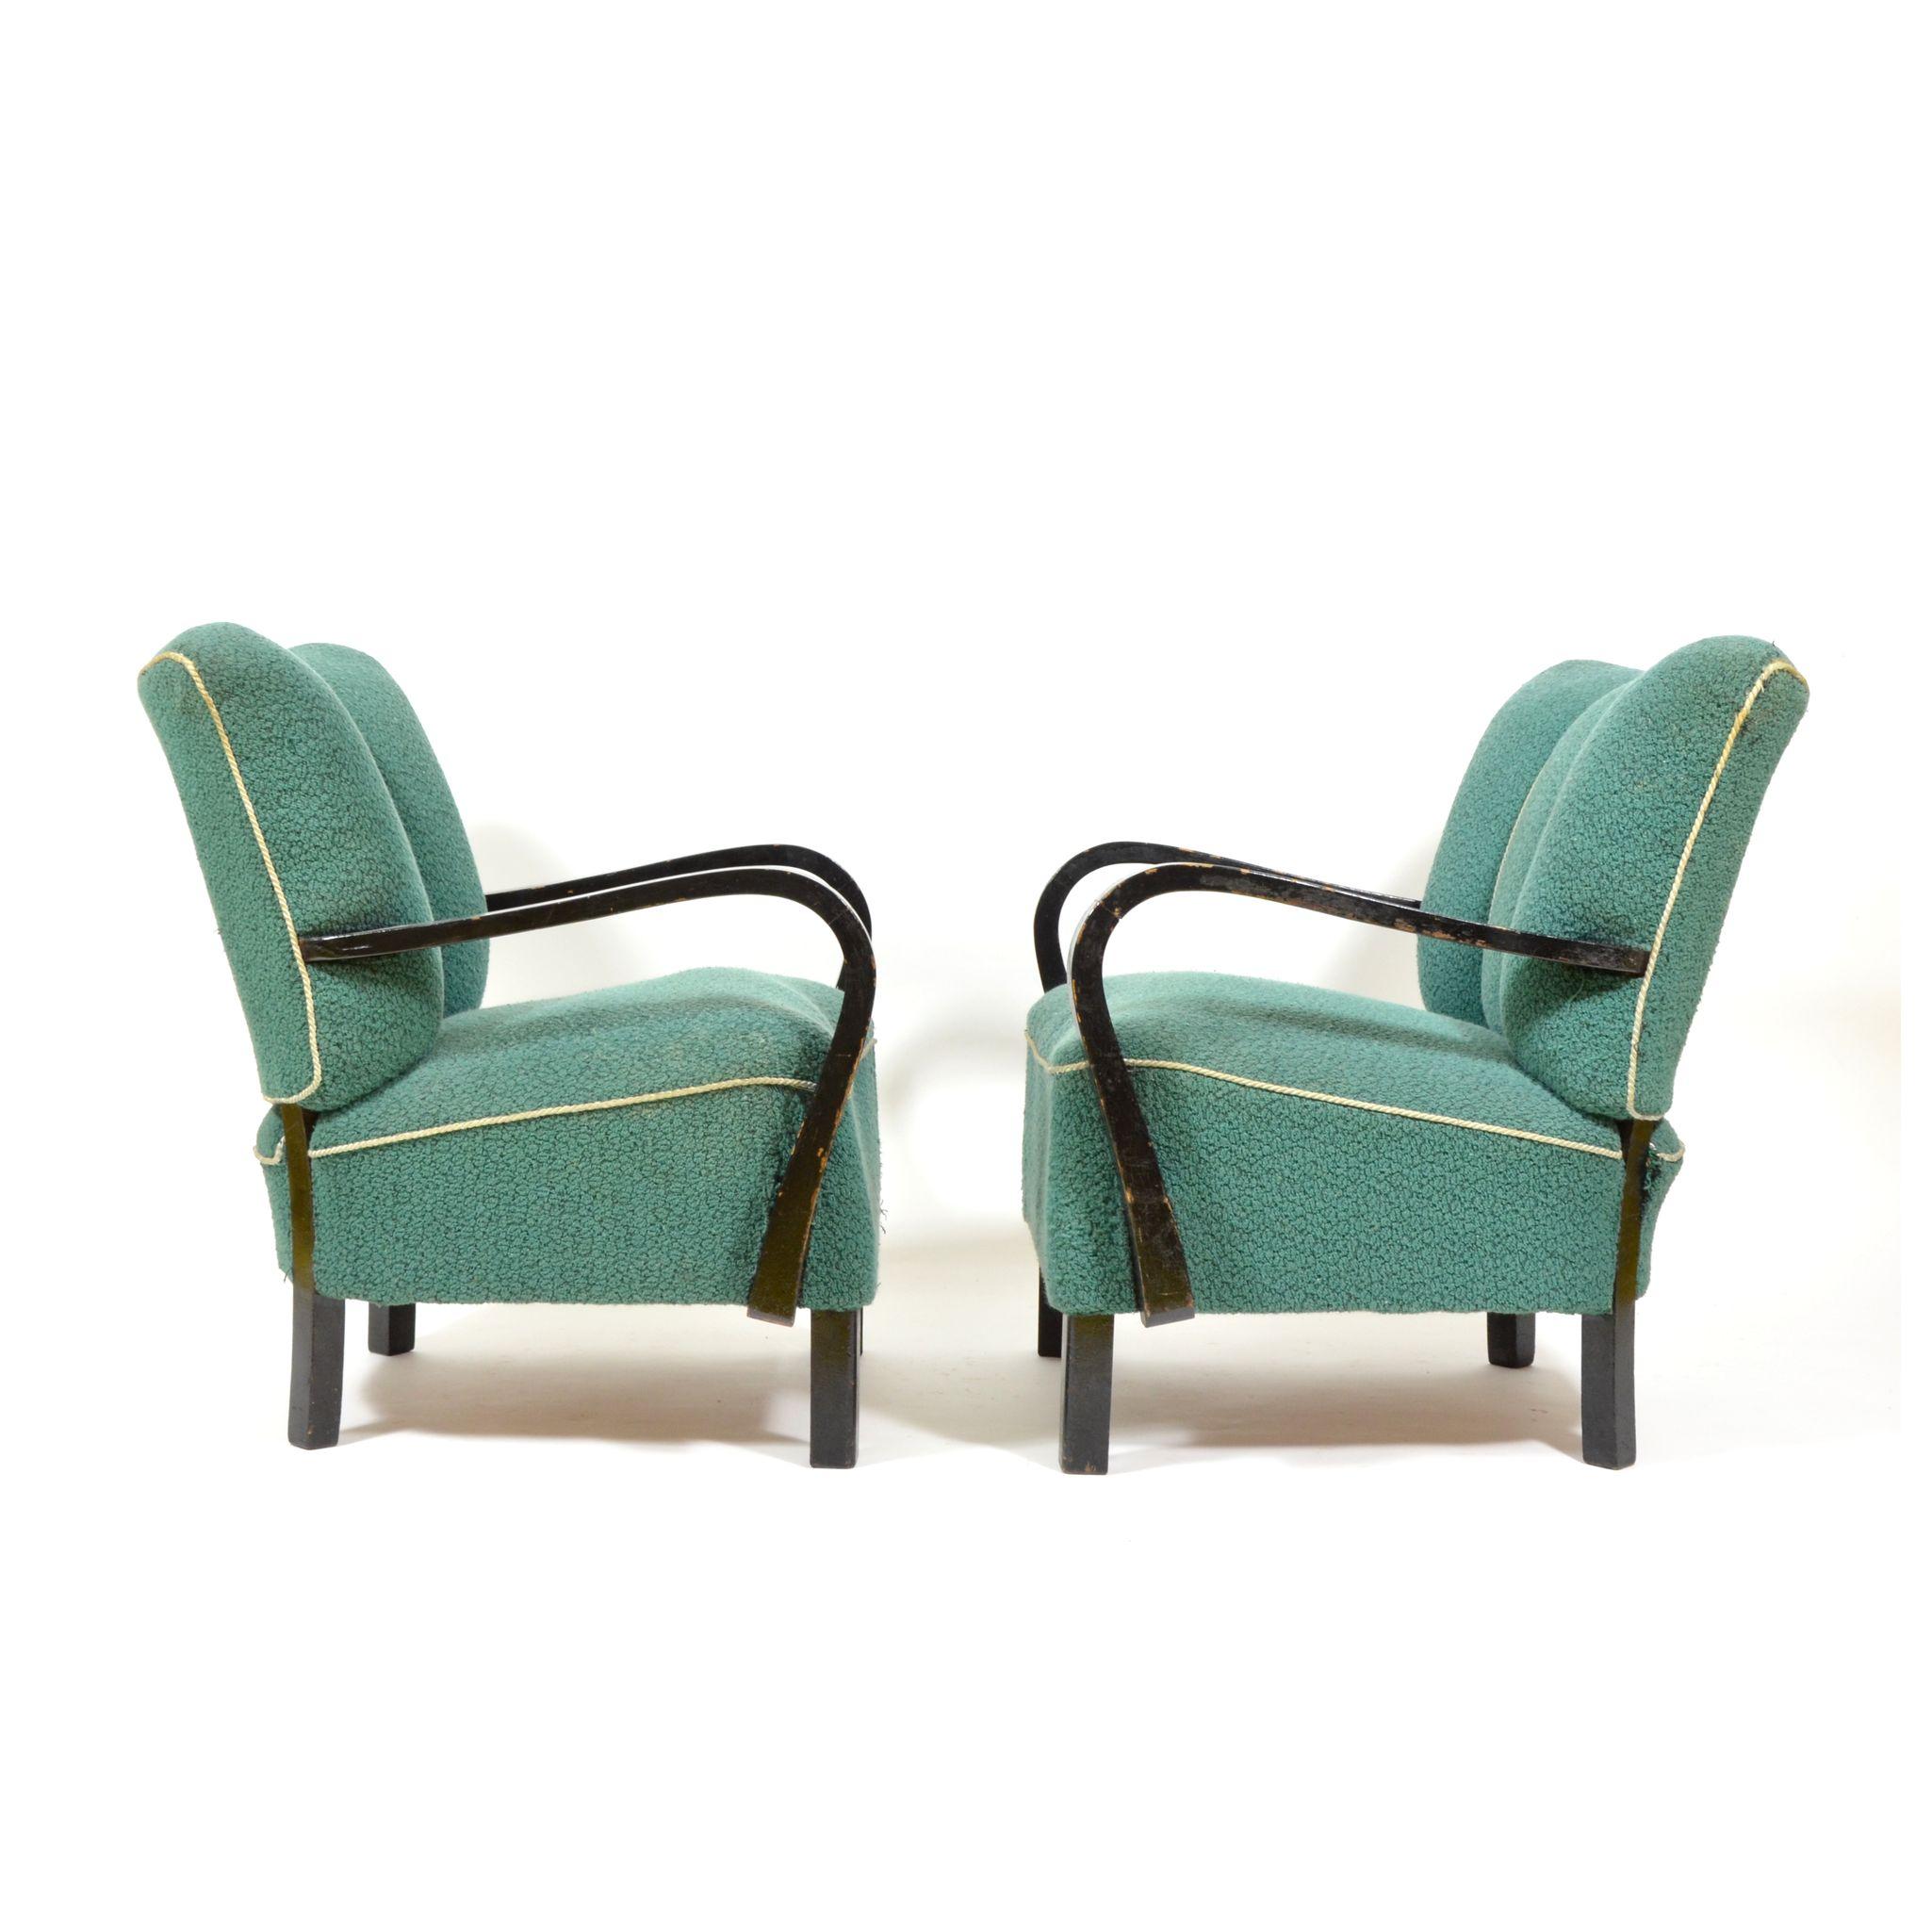 Pair of Original Armchairs with Wooden Armrests, Czechoslovakia, 1940s For Sale 2